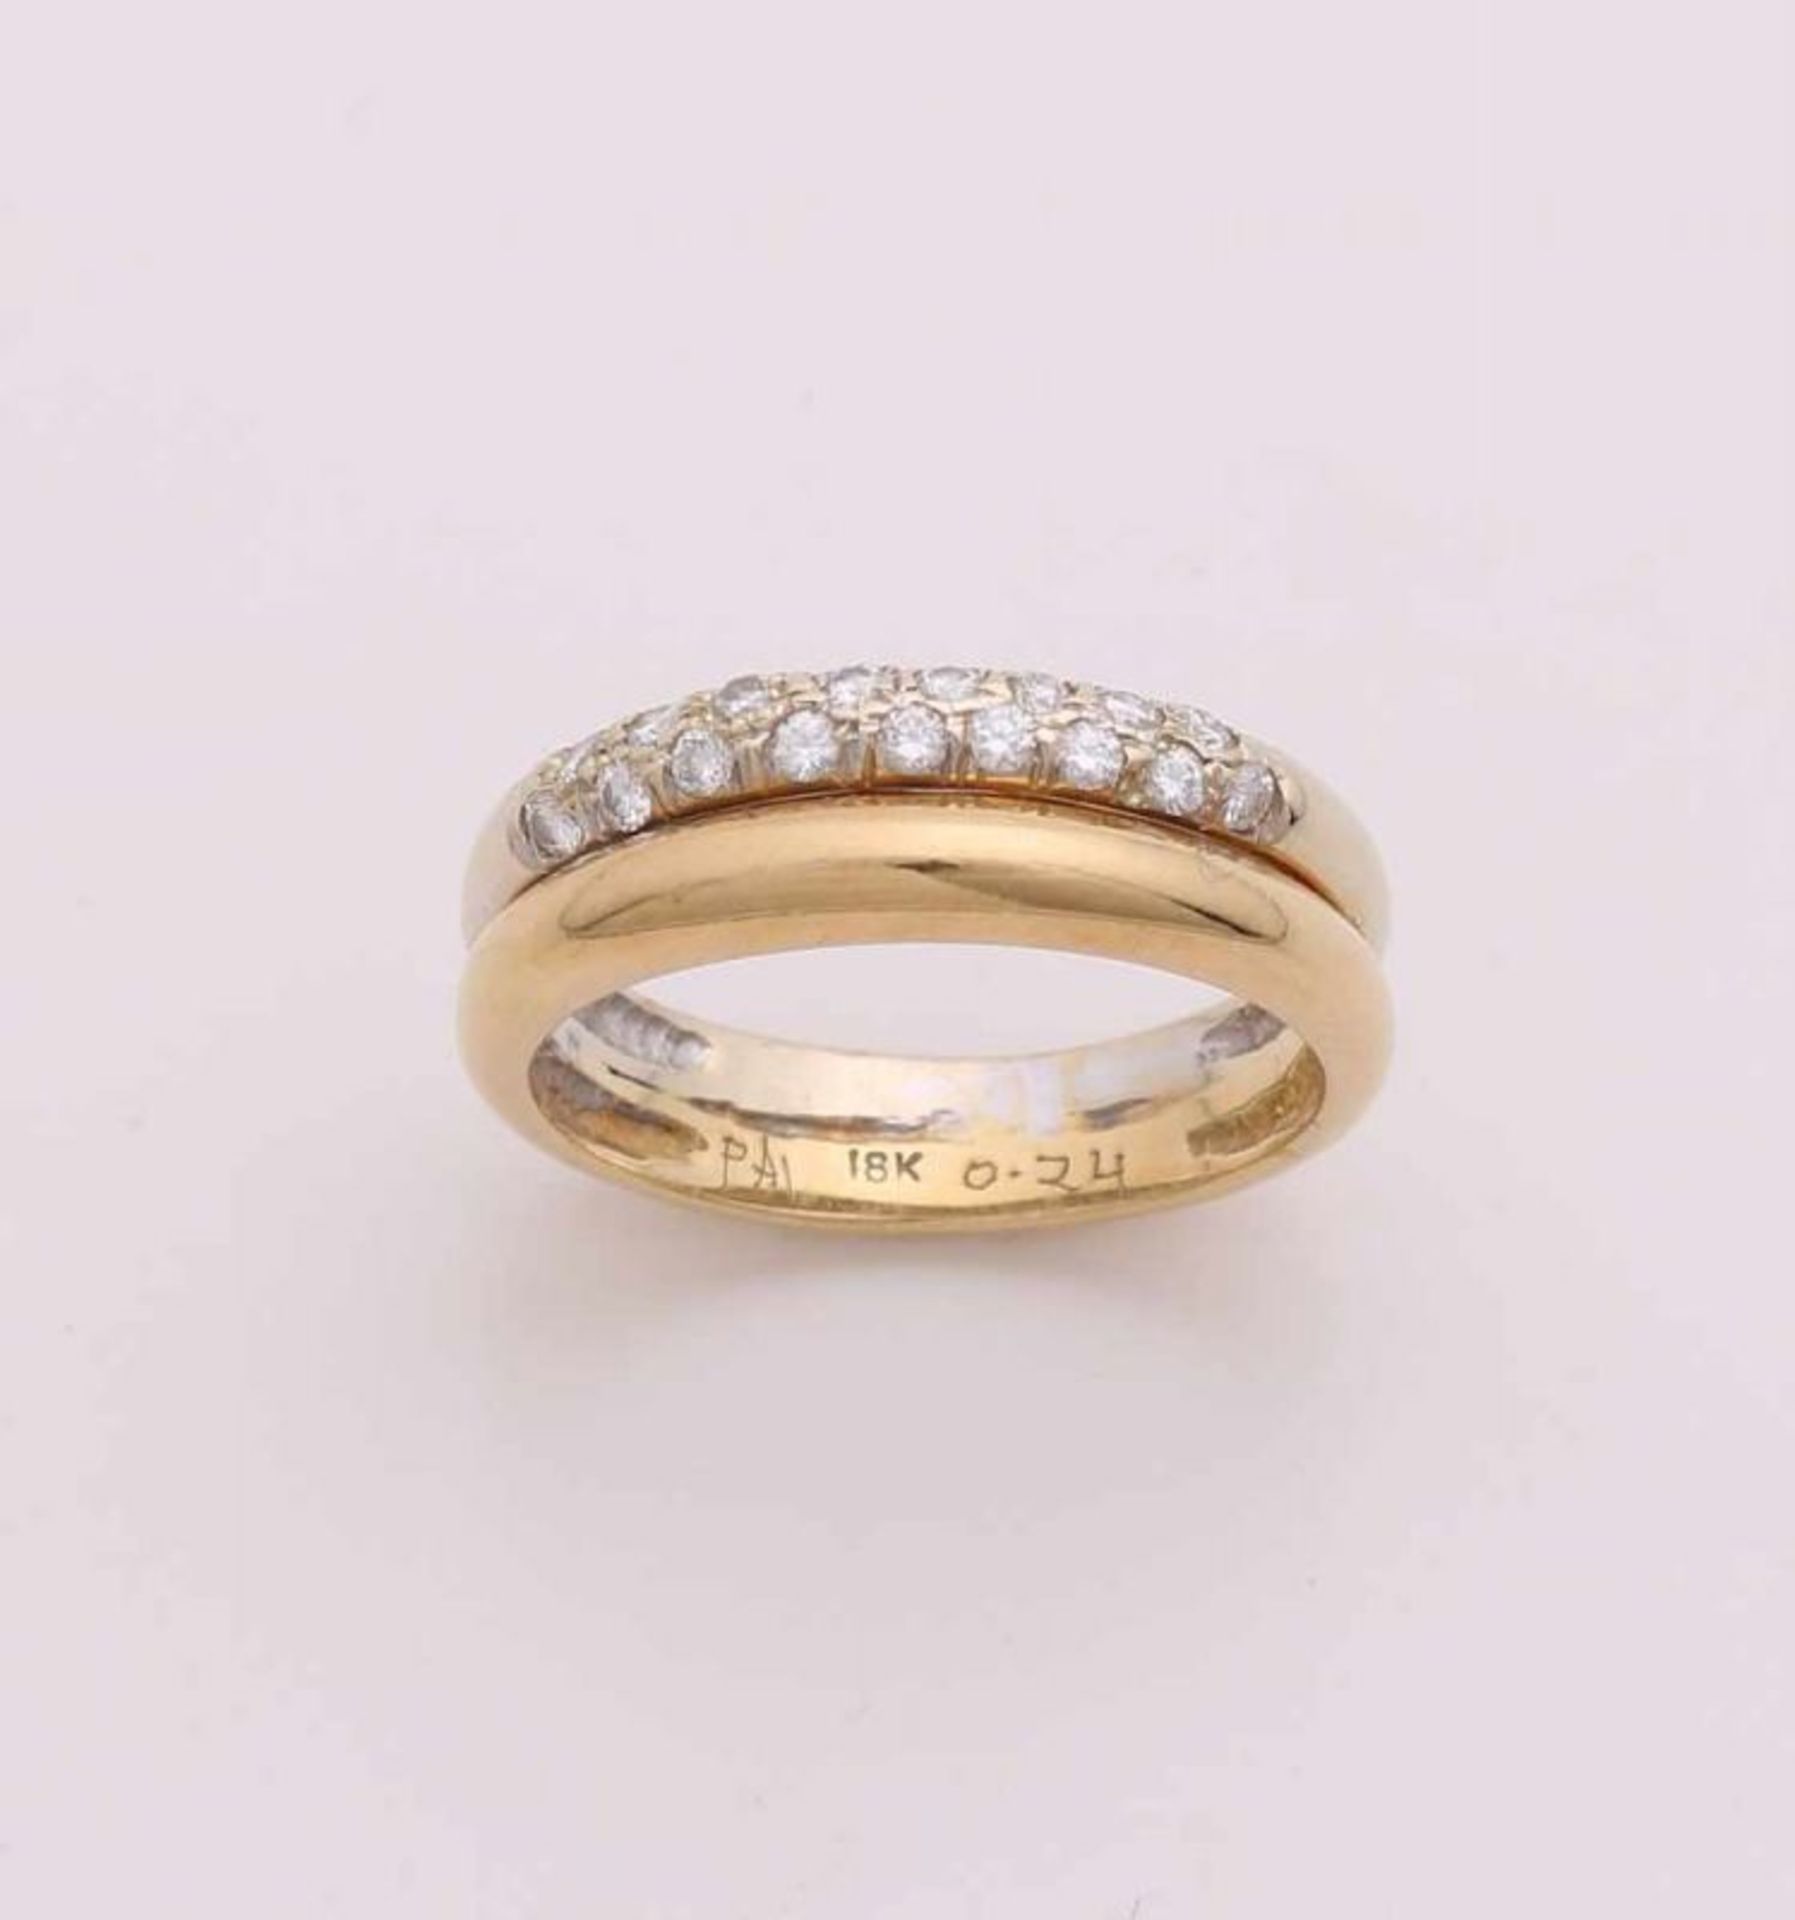 Gold ring, 750/000, with diamond. Ring with 2 convex bands, yellow gold and white gold with